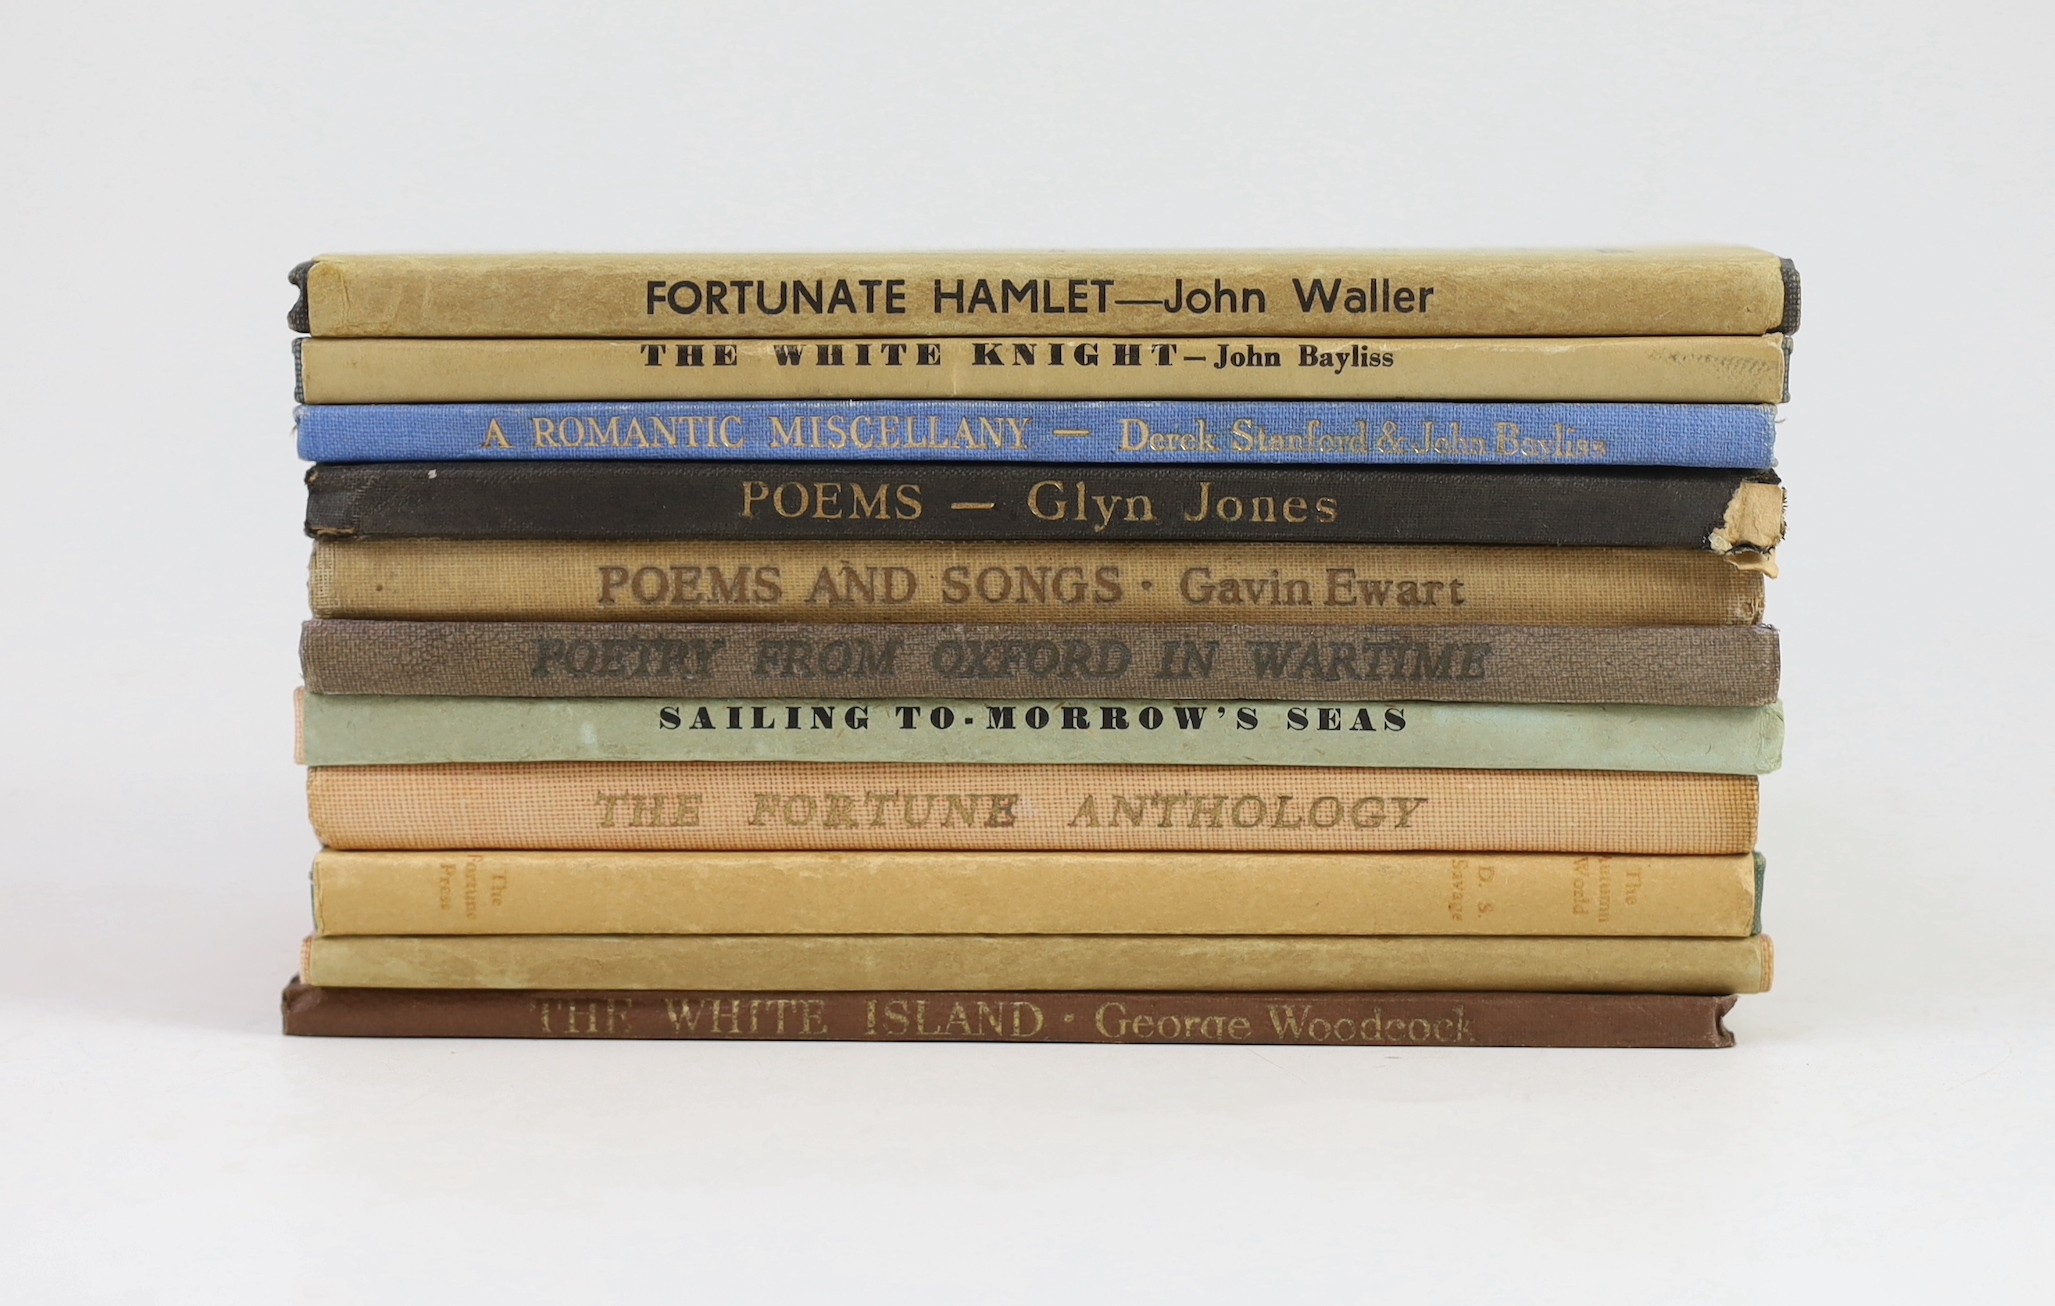 20th century Poetry - 11 Fortune Press Publications - Treece, Henry - 38 Poems, in d/j, (the authors 1st work), 1940; Woodcock, George - The White Island, 1940; Savage, D.S - The Autumn World, in d/j, with portrait front